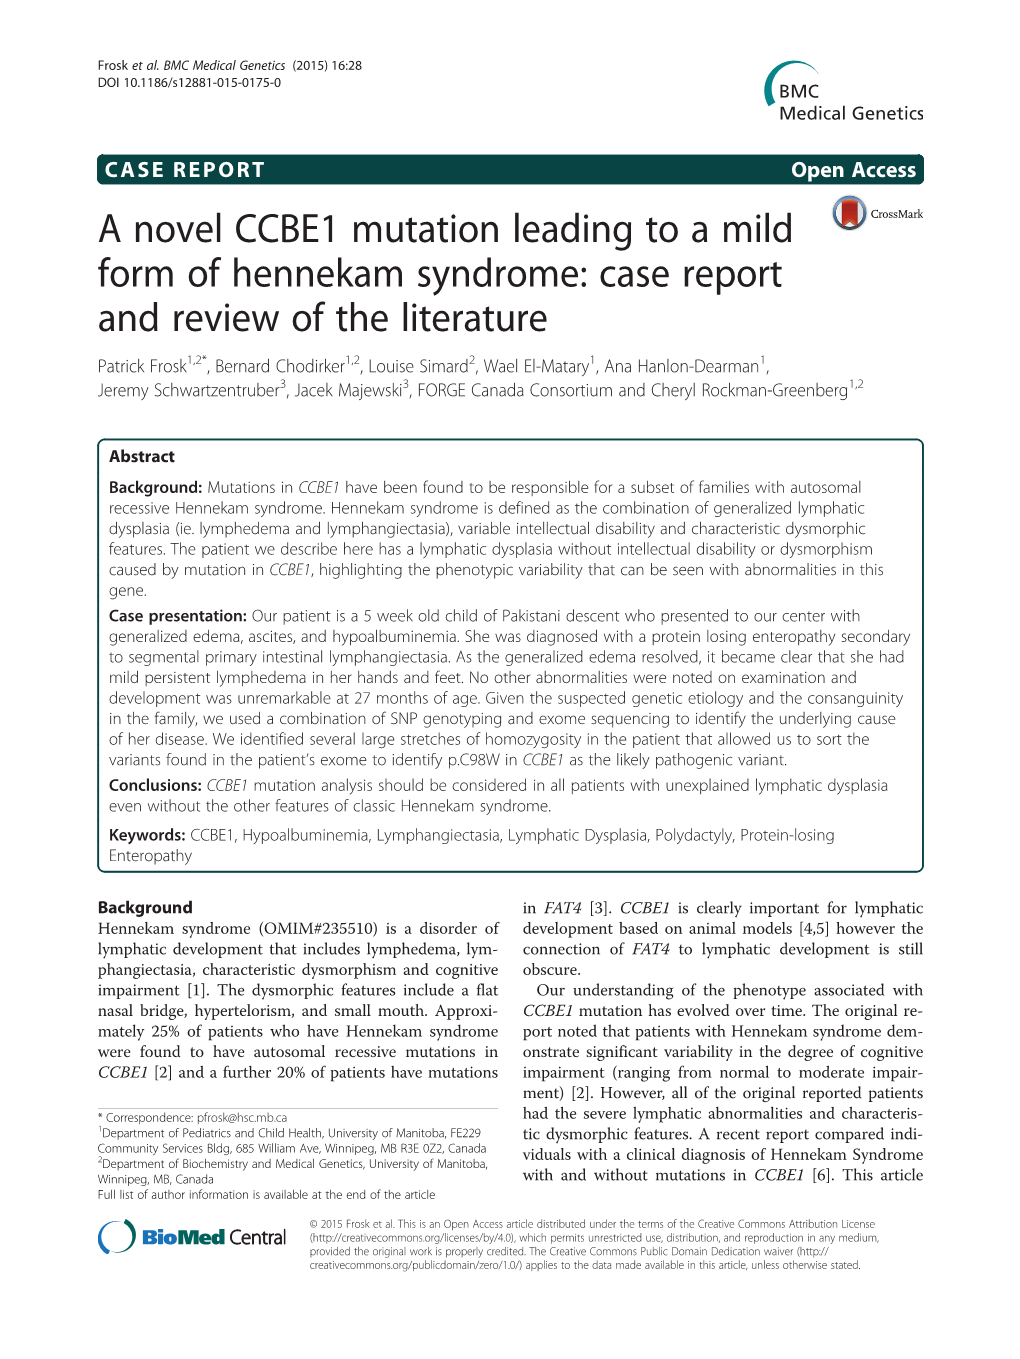 A Novel CCBE1 Mutation Leading to a Mild Form Of